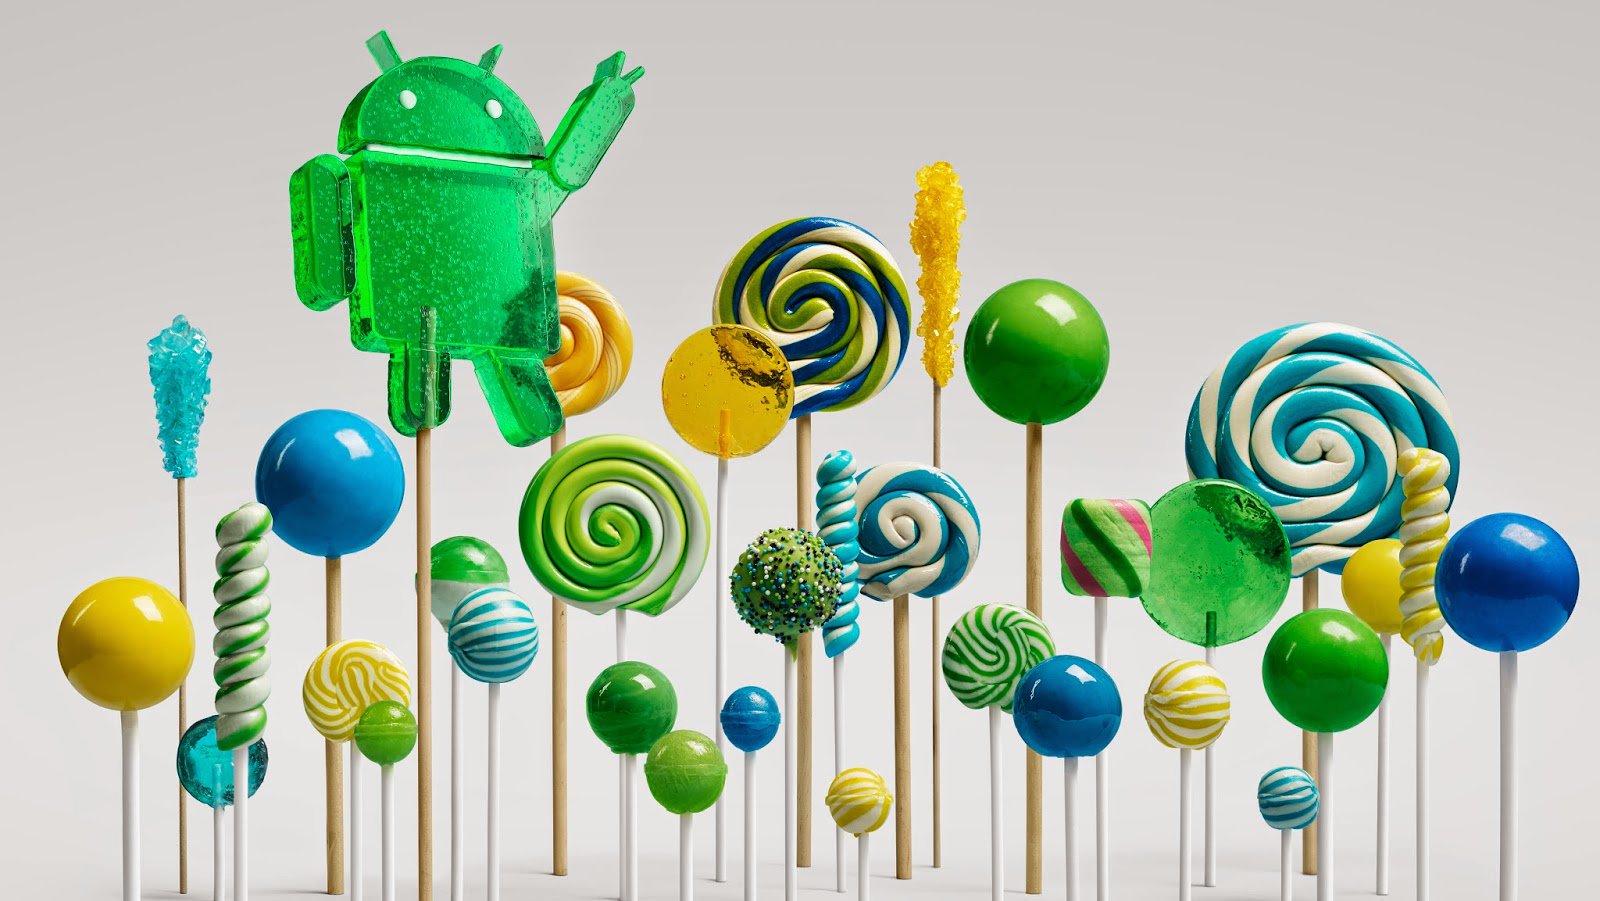 Top 10 Tips for Making your Android Better